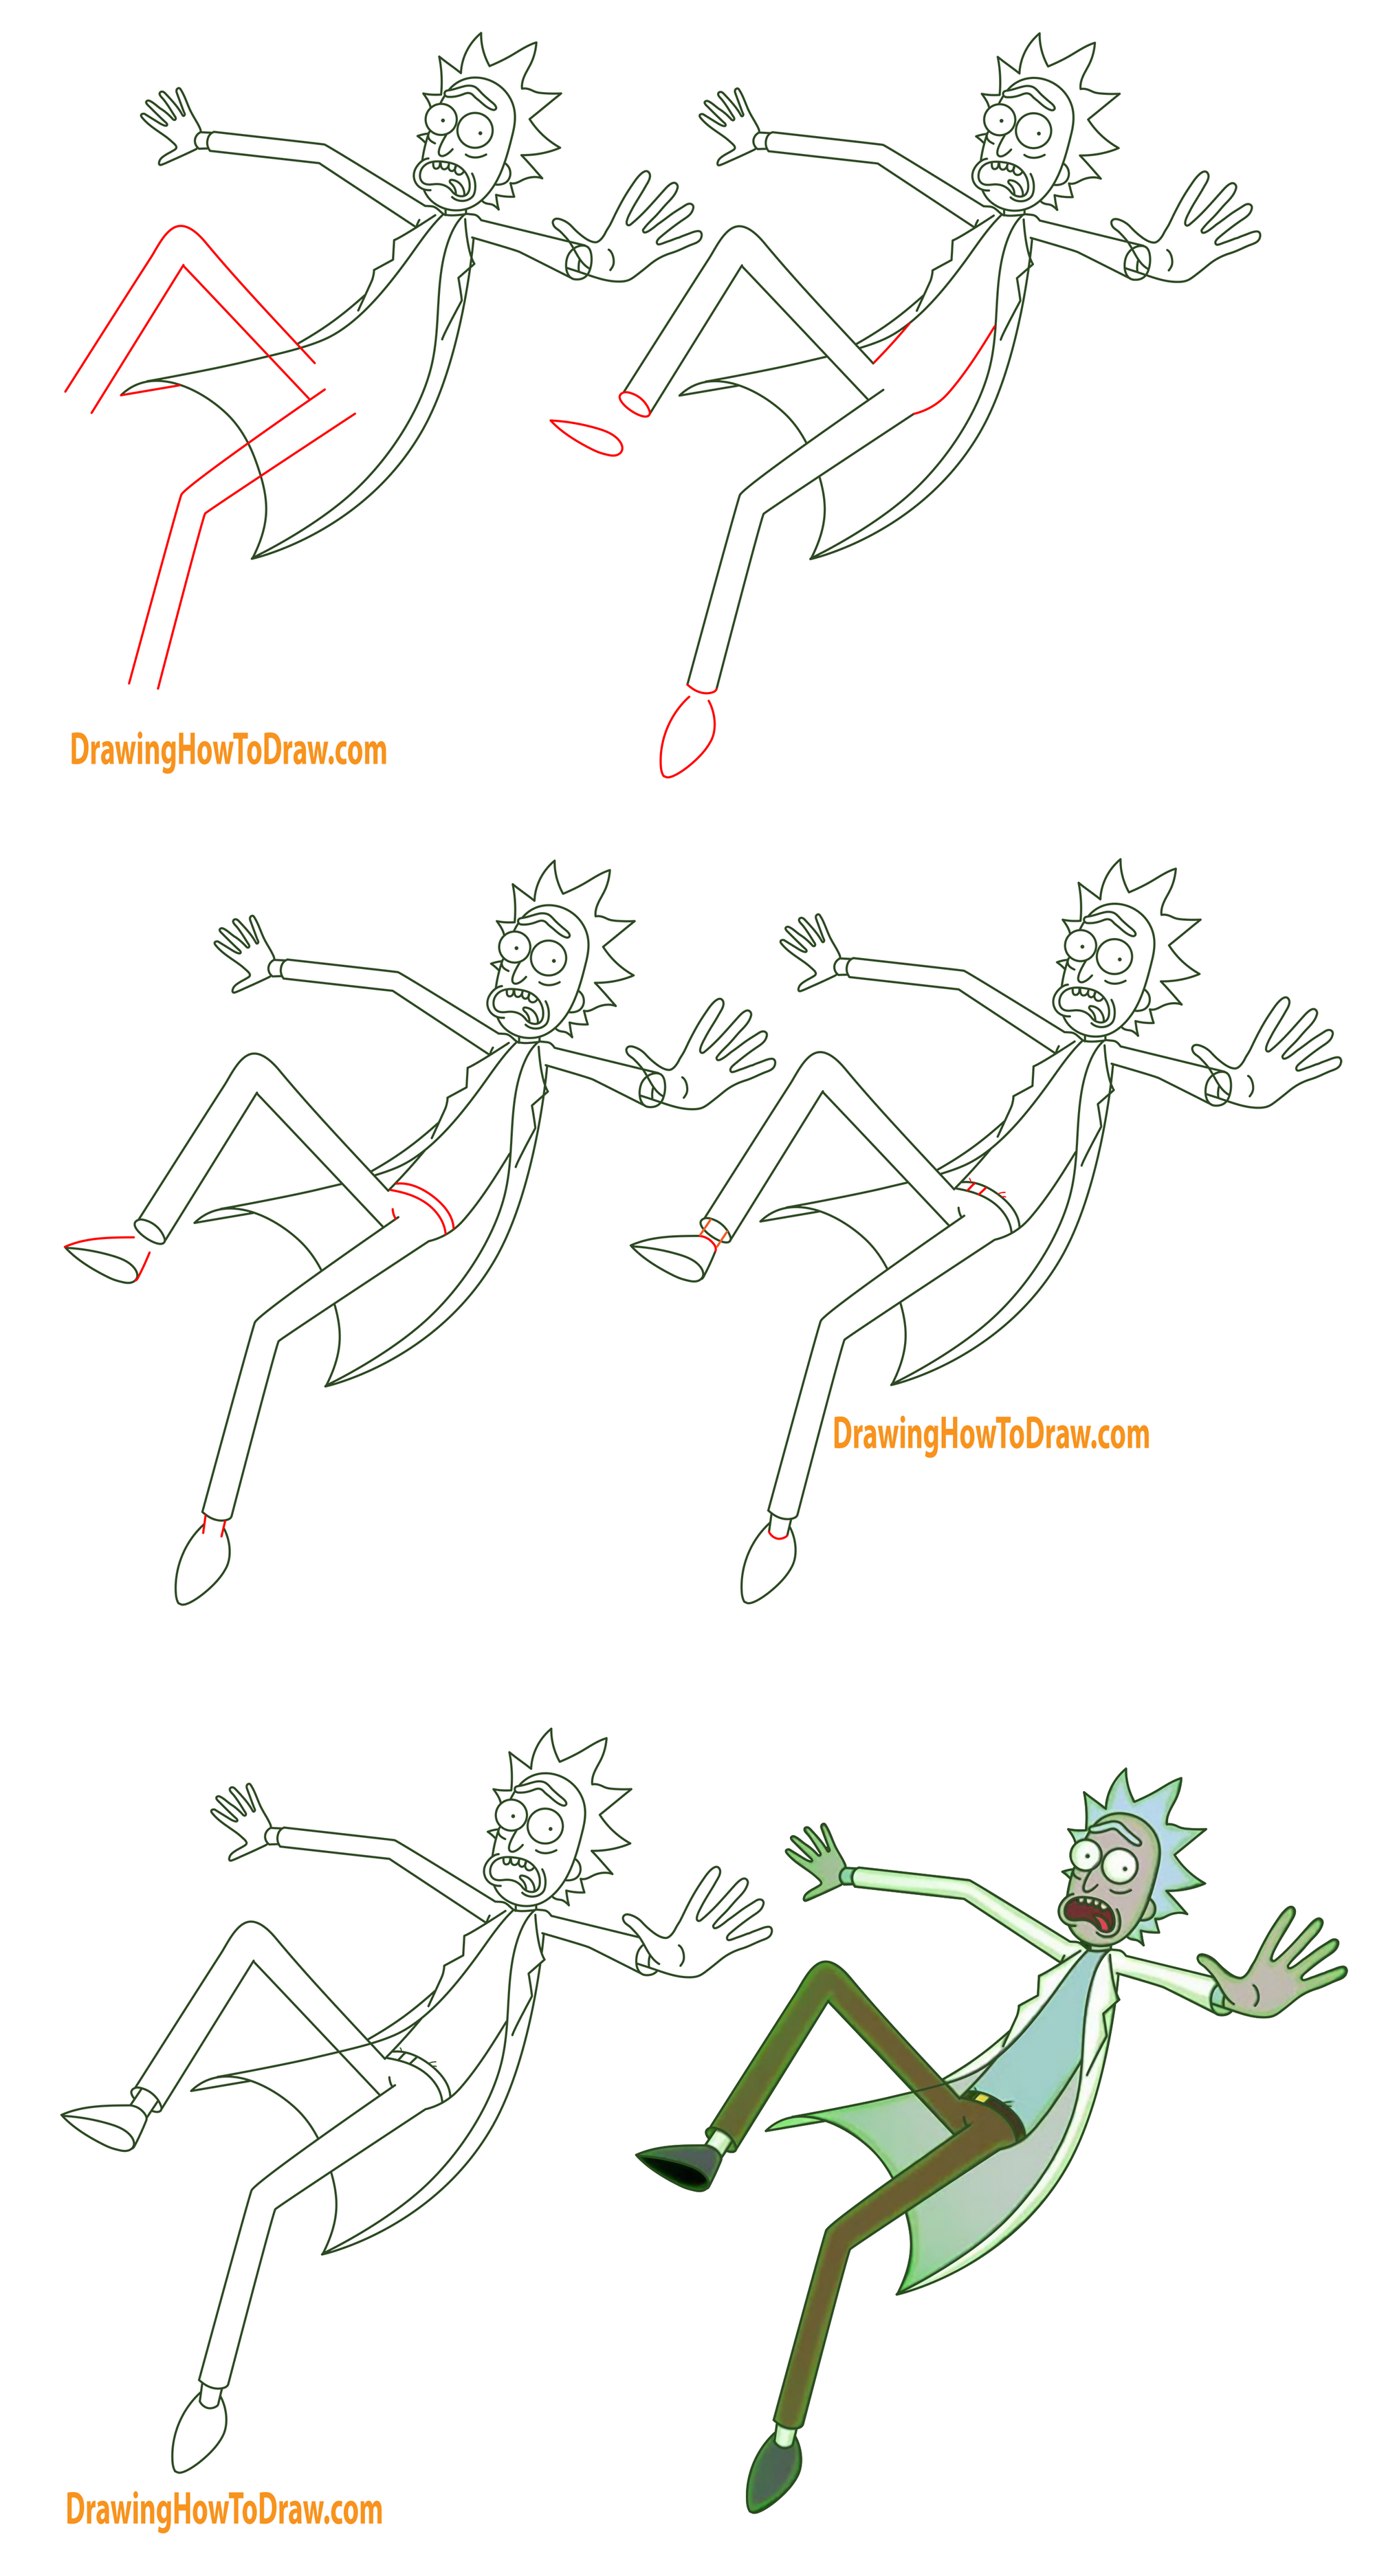 How to Draw Rick from Rick and Morty Easy Step-by-Step Drawing Tutorial